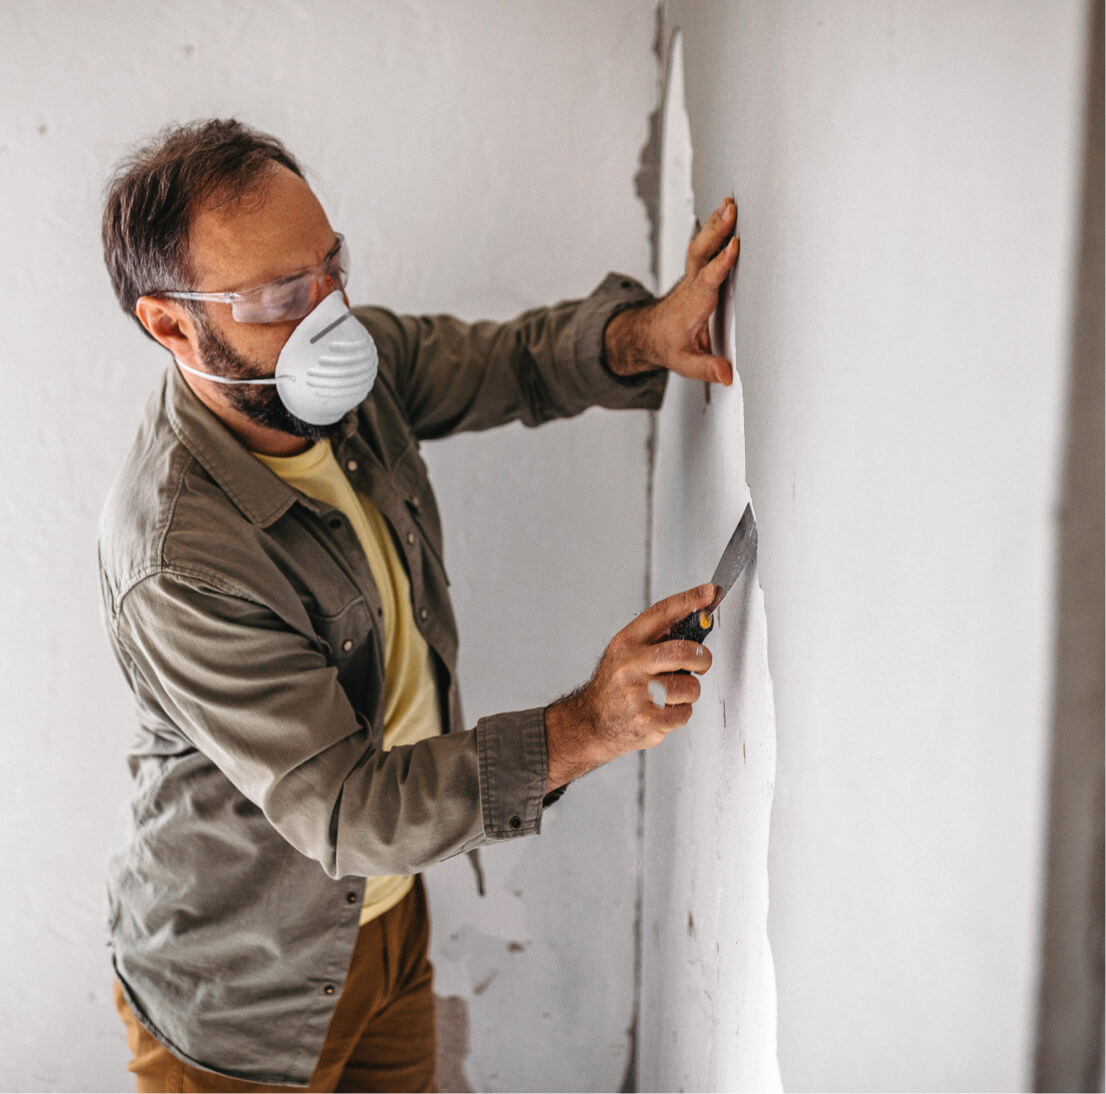 Drywall contractor insurance